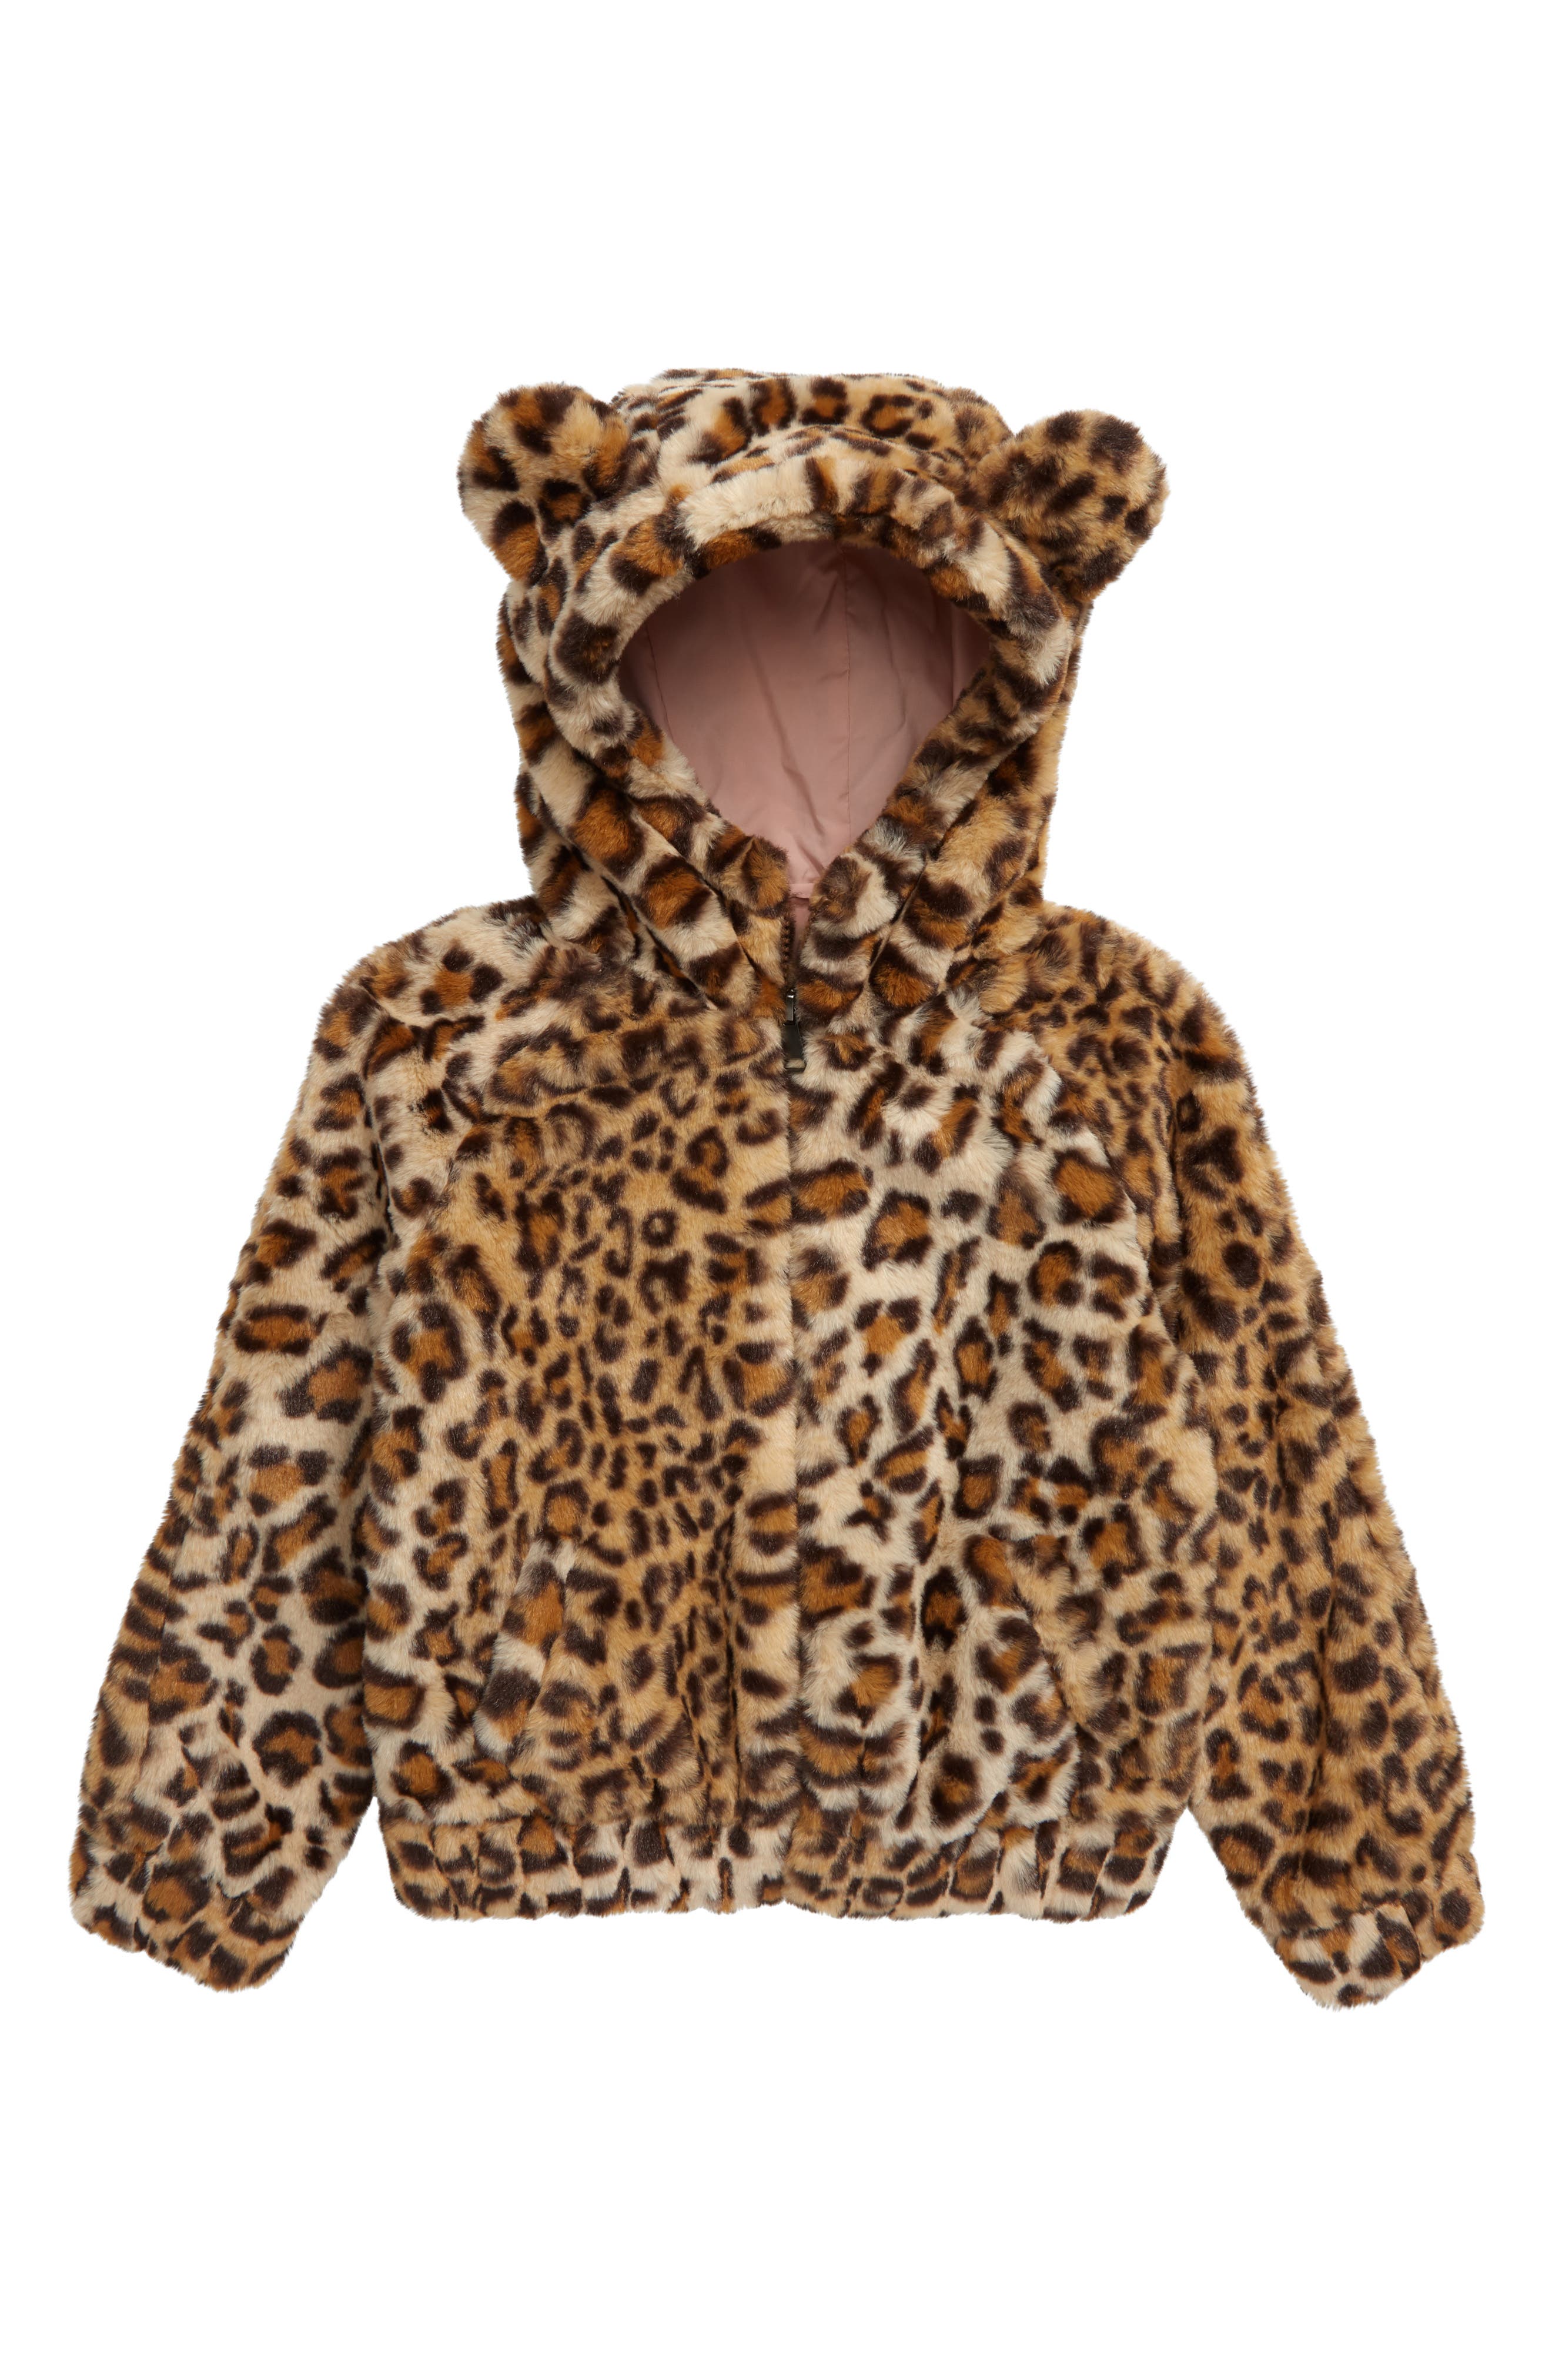 24M NWT Starting Out Tan Leopard Trim Toddler Kids Baby Girl Coat 12M 